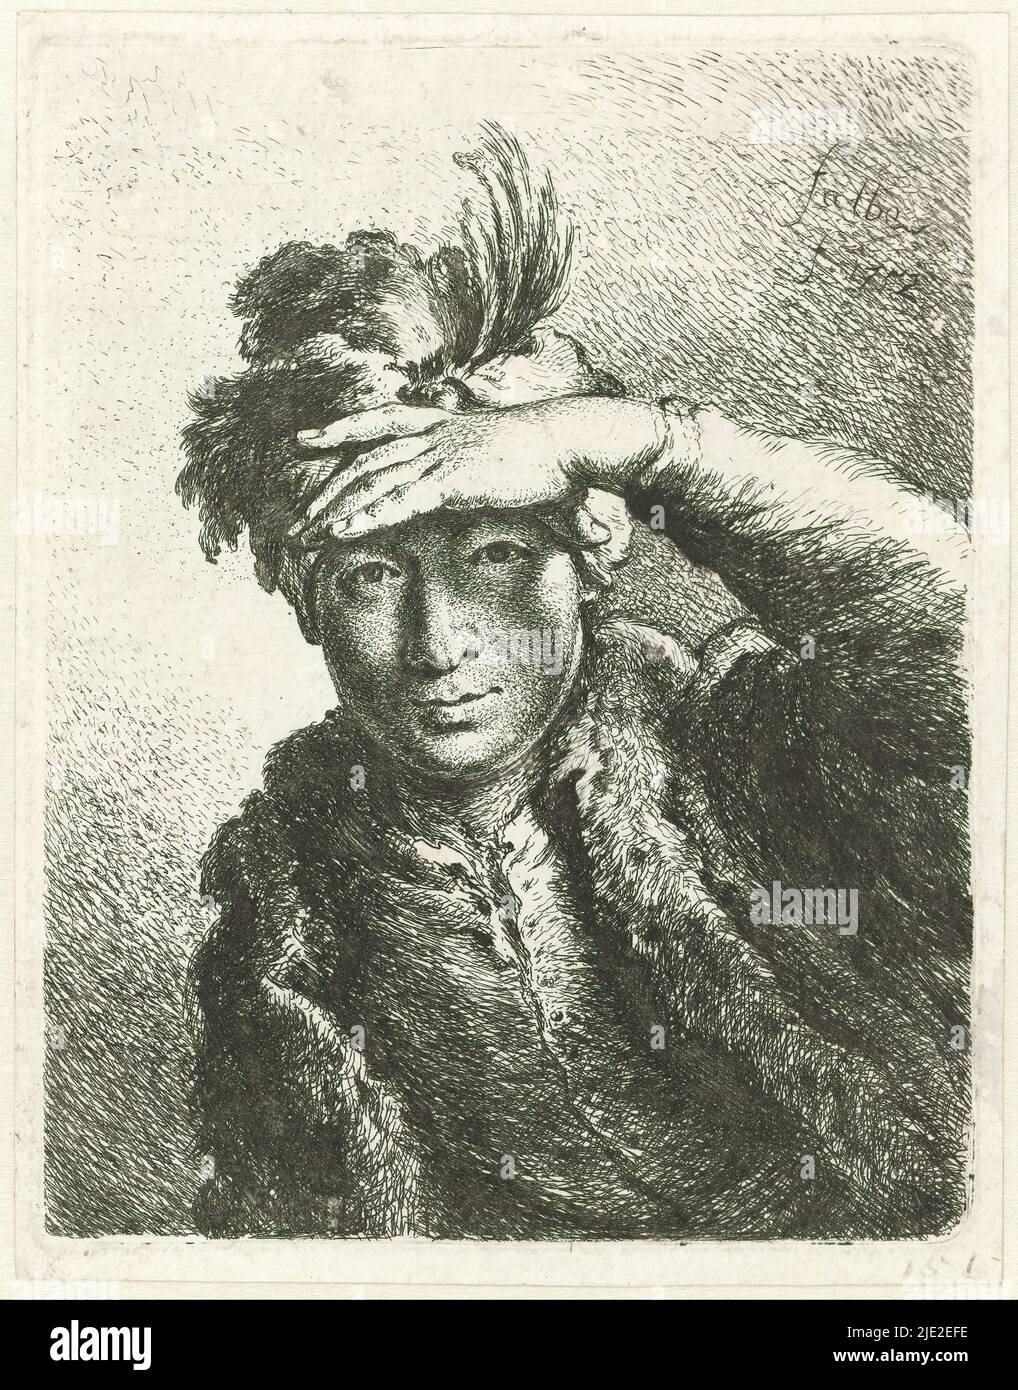 Portrait of a man with a feathered beret, Portrait of a man with a feathered beret shielding his eyes from the light with his left hand. Possibly a self-portrait., print maker: Joachim Martin Falbe, (mentioned on object), Berlin, 1752, paper, etching, height 145 mm × width 114 mm, height 153 mm × width 119 mm Stock Photo